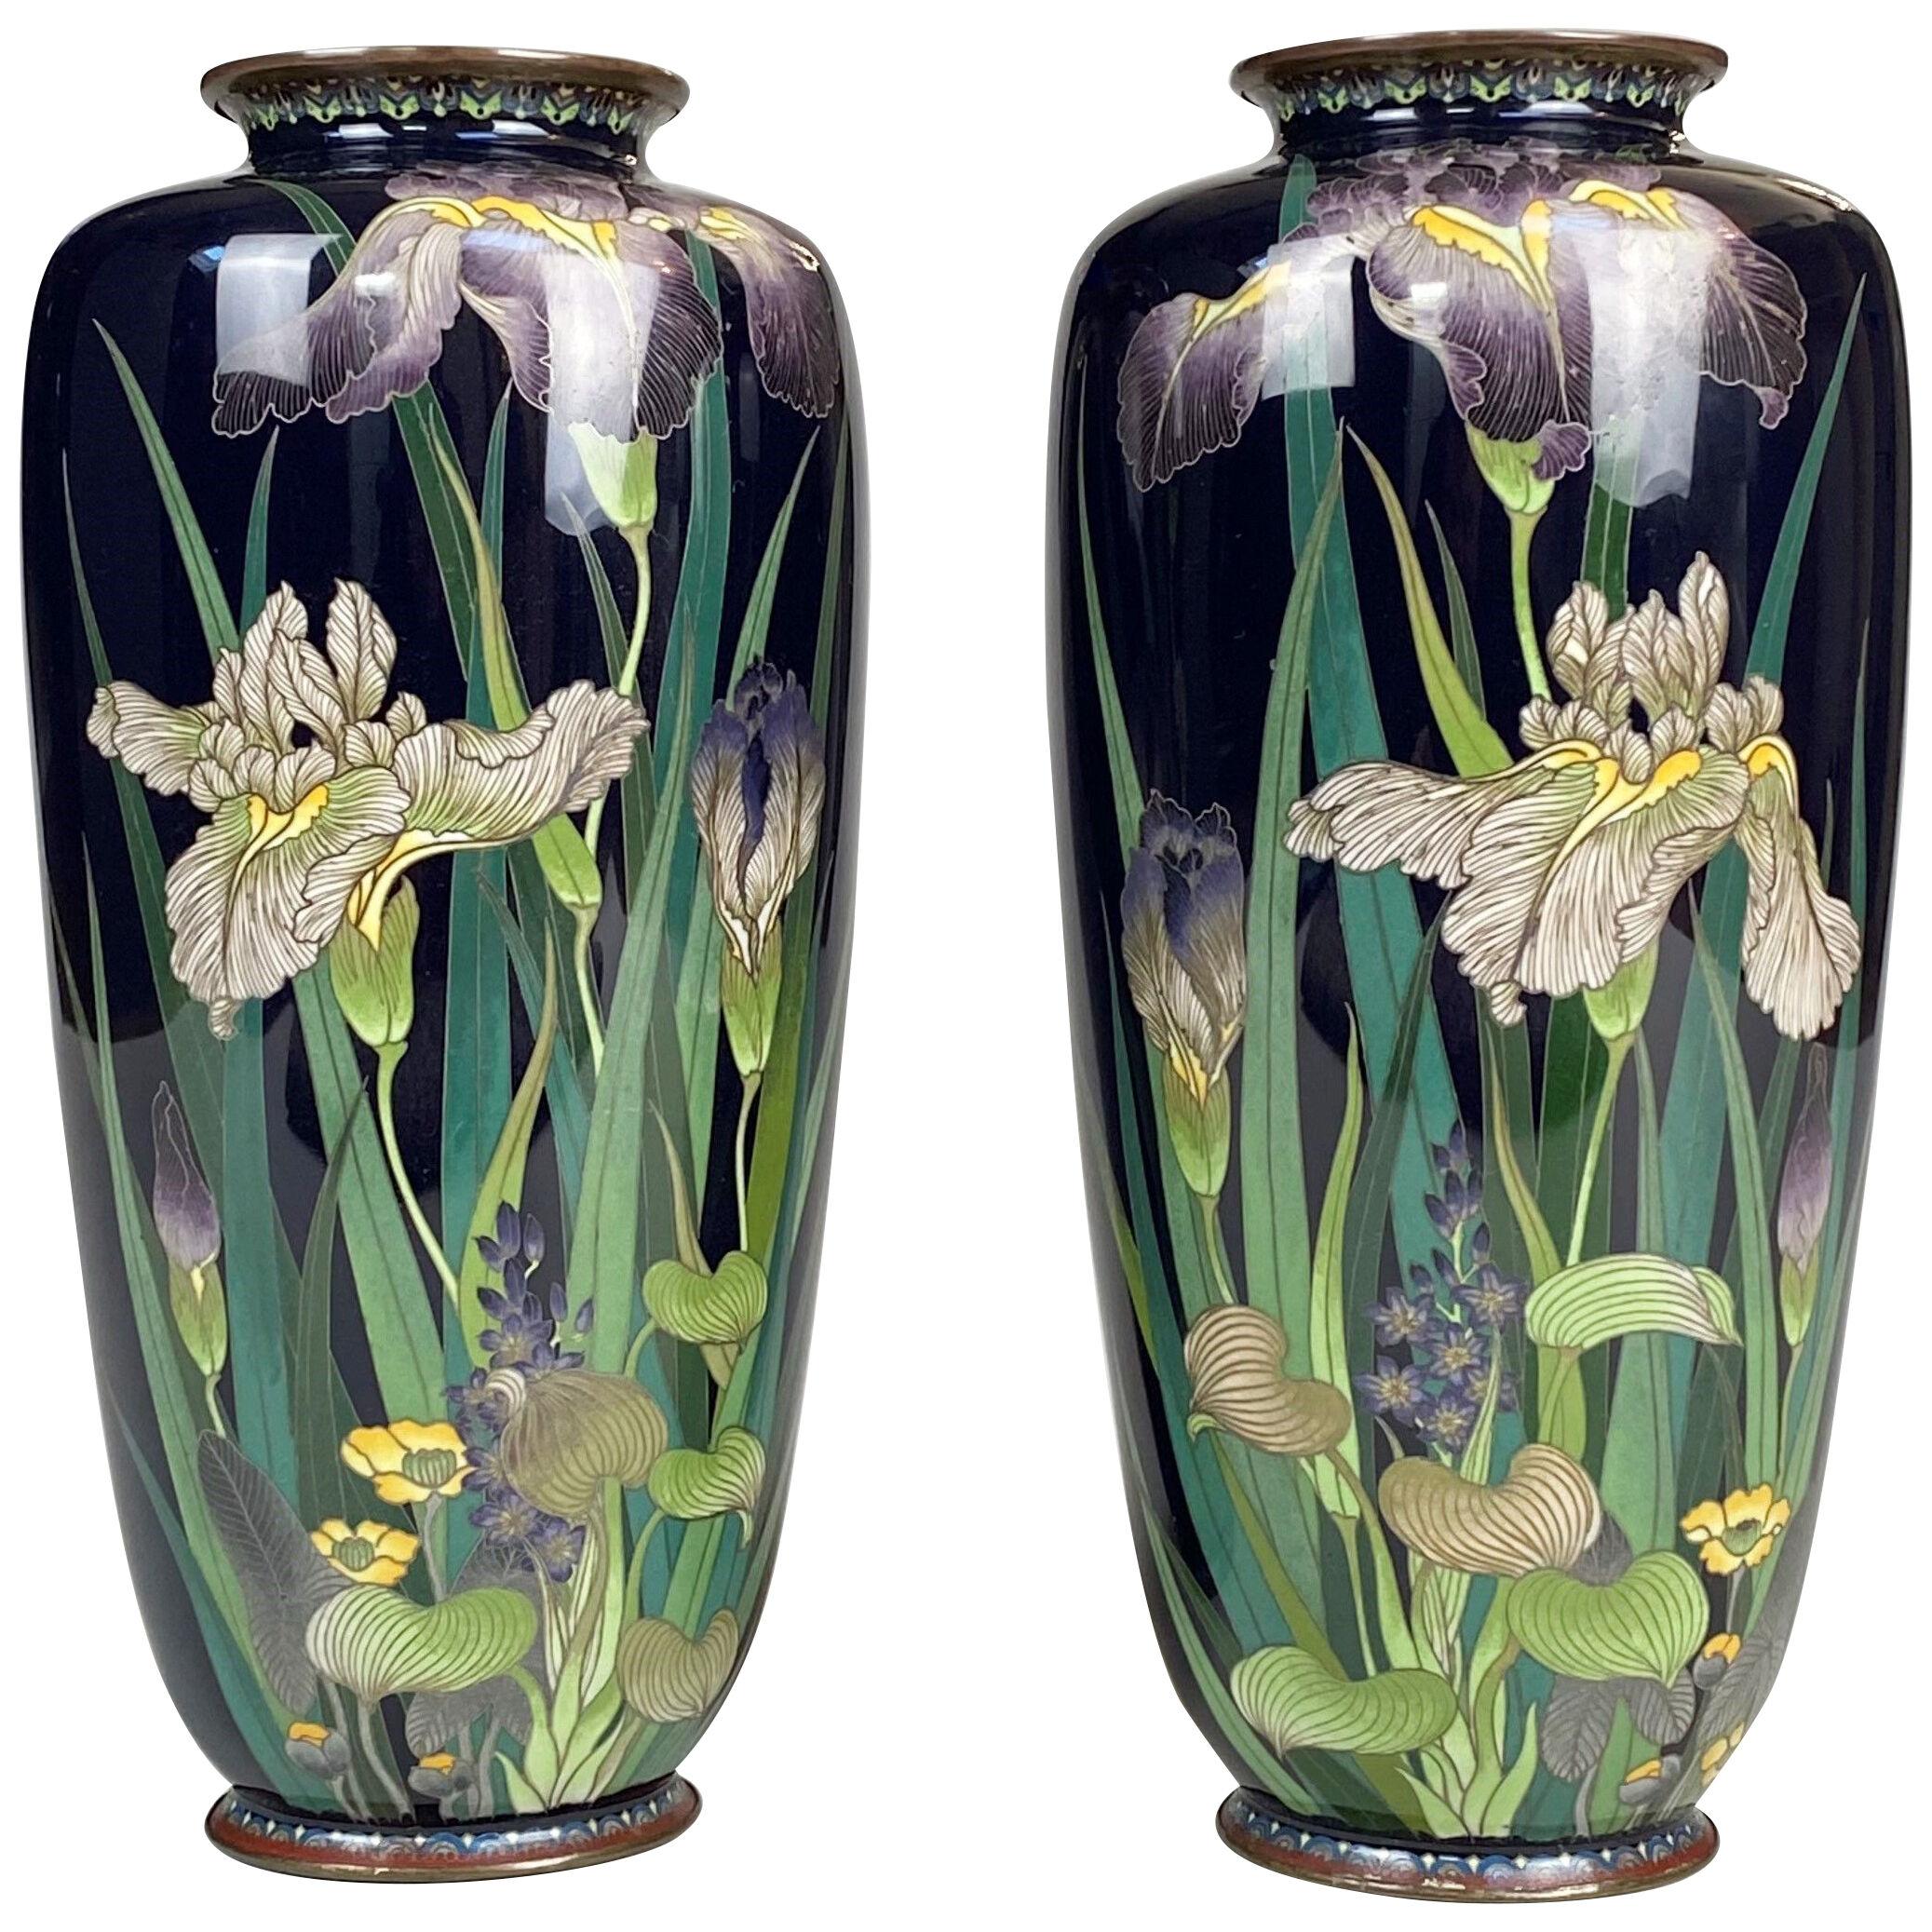 An elegant pair of antique Japanese silver-wire Cloisonne vases 